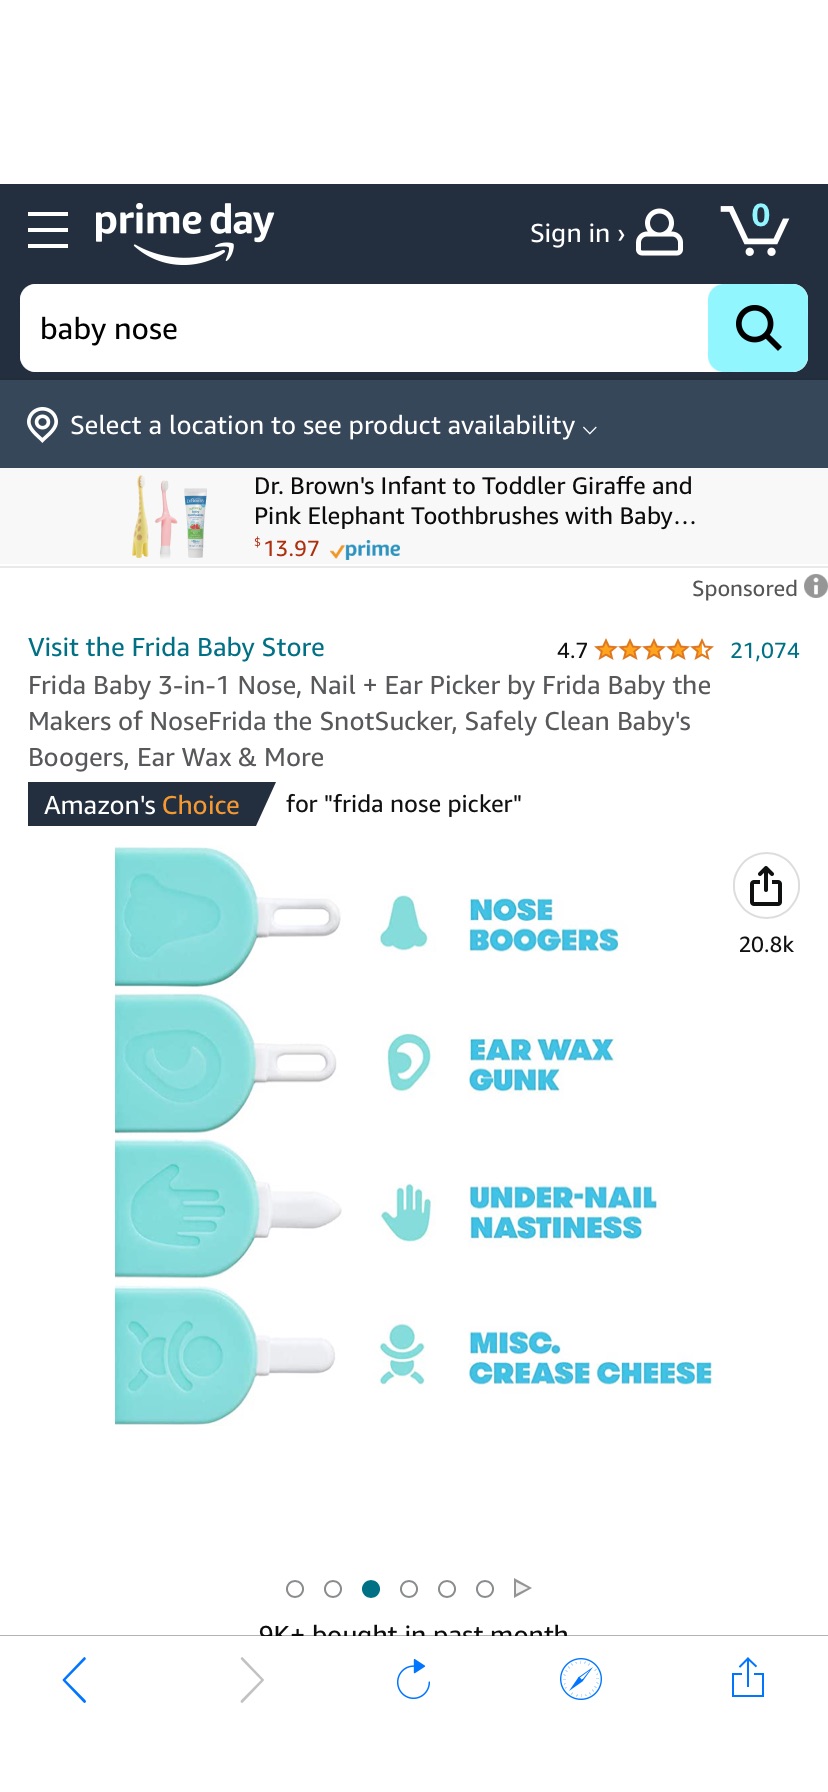 Amazon.com: Frida Baby三合一挖耳朵、鼻子、指甲勺 3-in-1 Nose, Nail + Ear Picker by Frida Baby the Makers of NoseFrida the SnotSucker, Safely Clean Baby's Boogers, Ear Wax & More : Baby